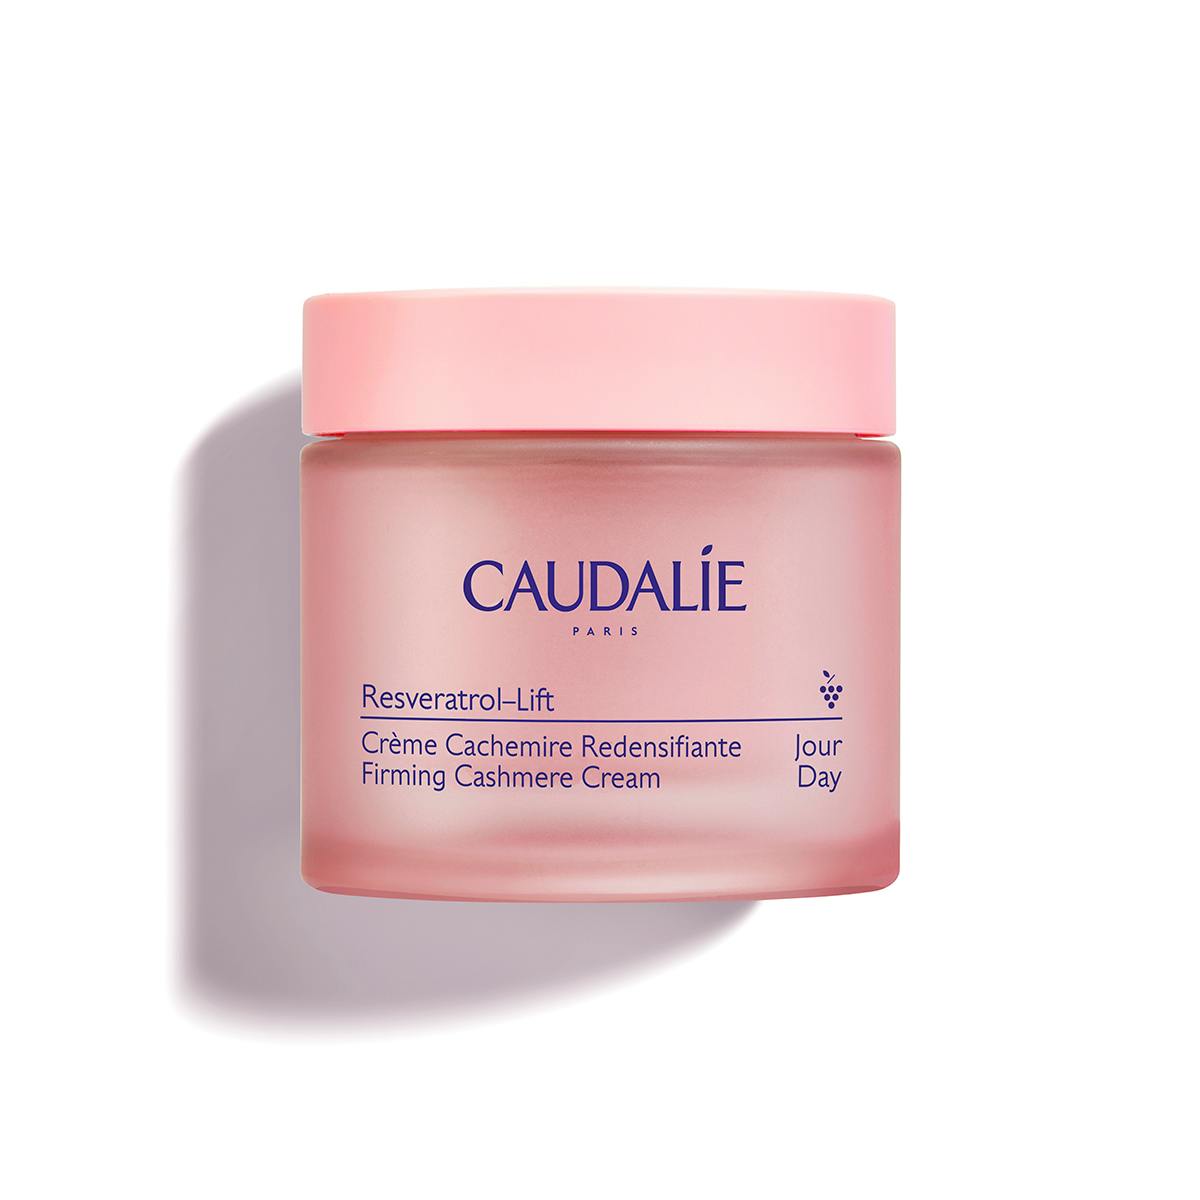 CAUDALIE Resveratrol-Lift Firming Cashmere Cream 50ml  SolidBlanc. Find  your favorite products at the best prices